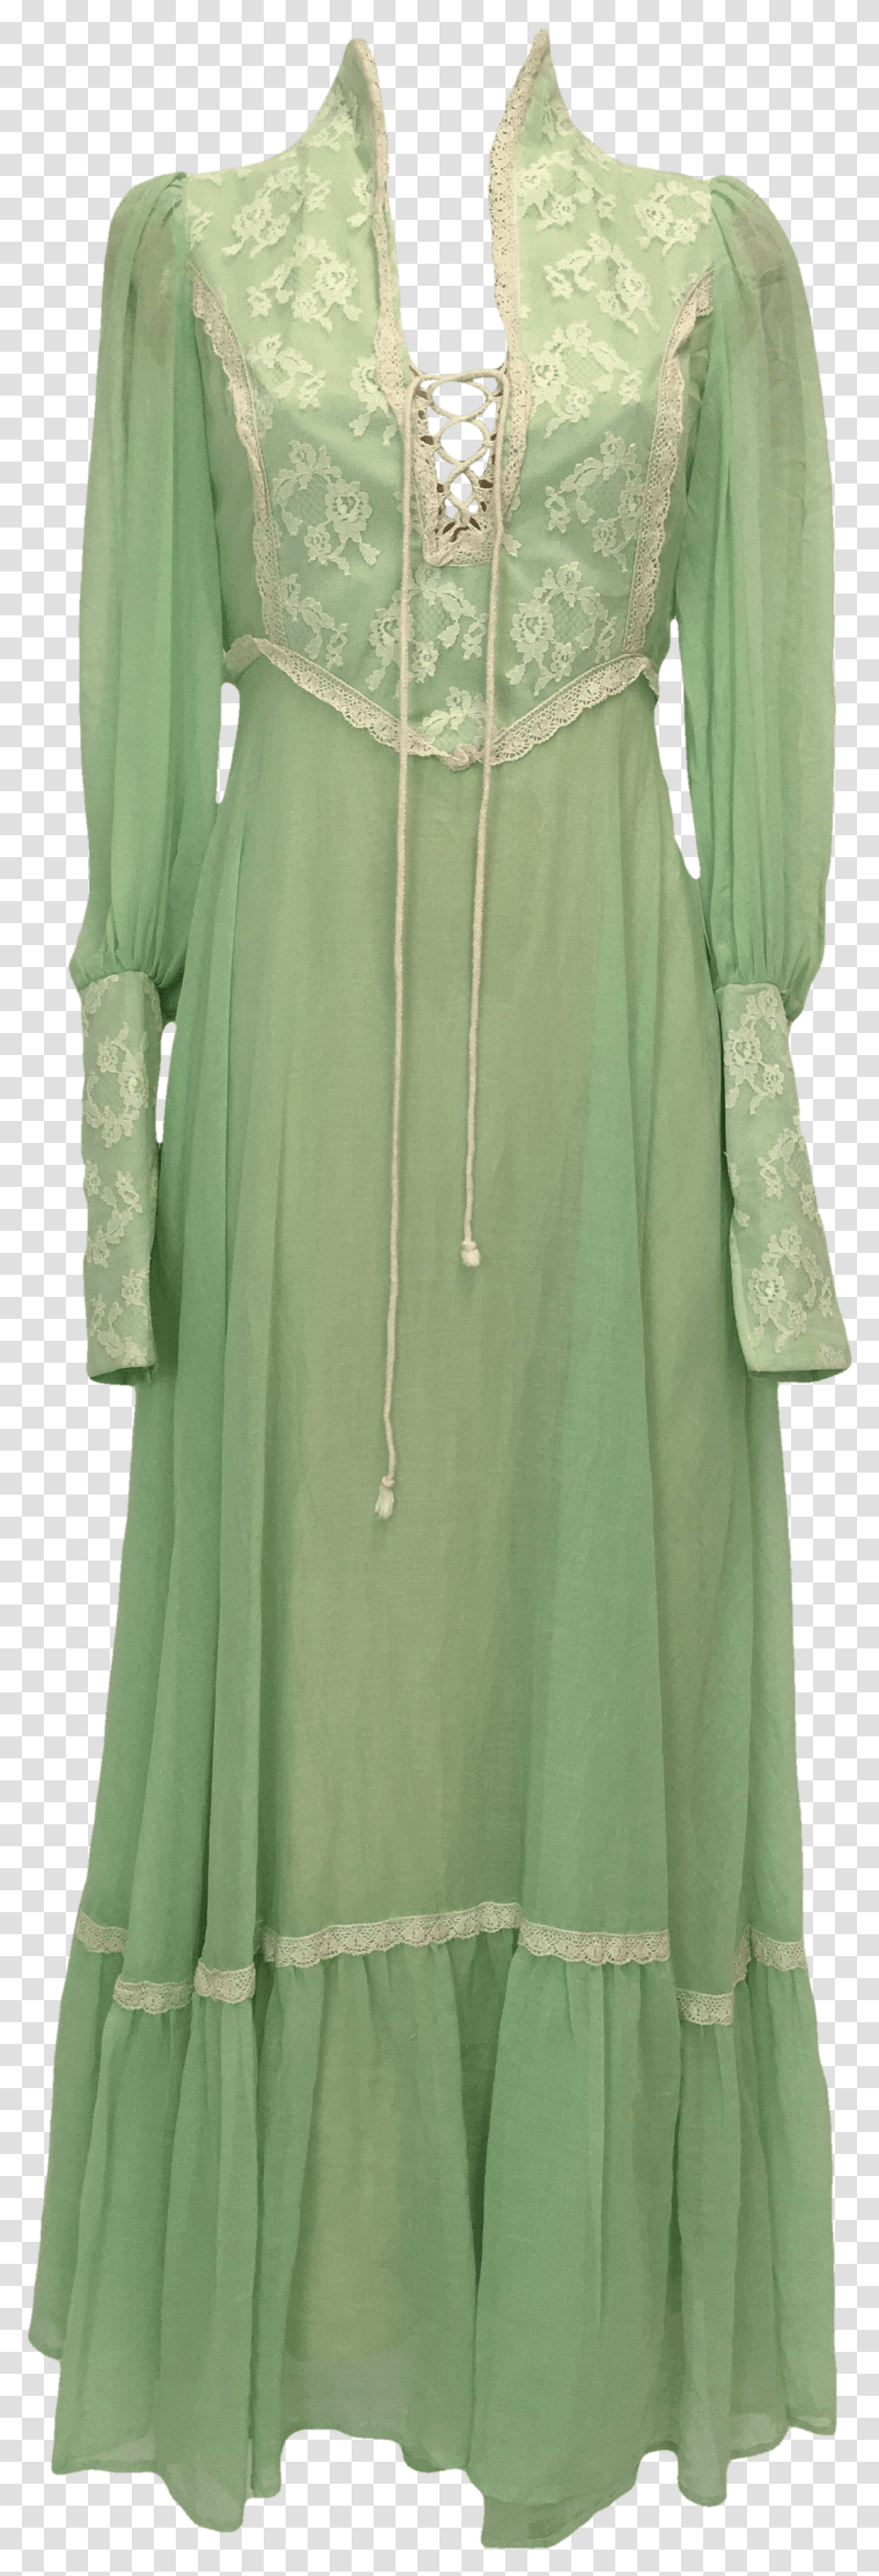 S Mint Green And Lace Prairie Dress One Piece Garment, Cape, Long Sleeve, Fashion Transparent Png